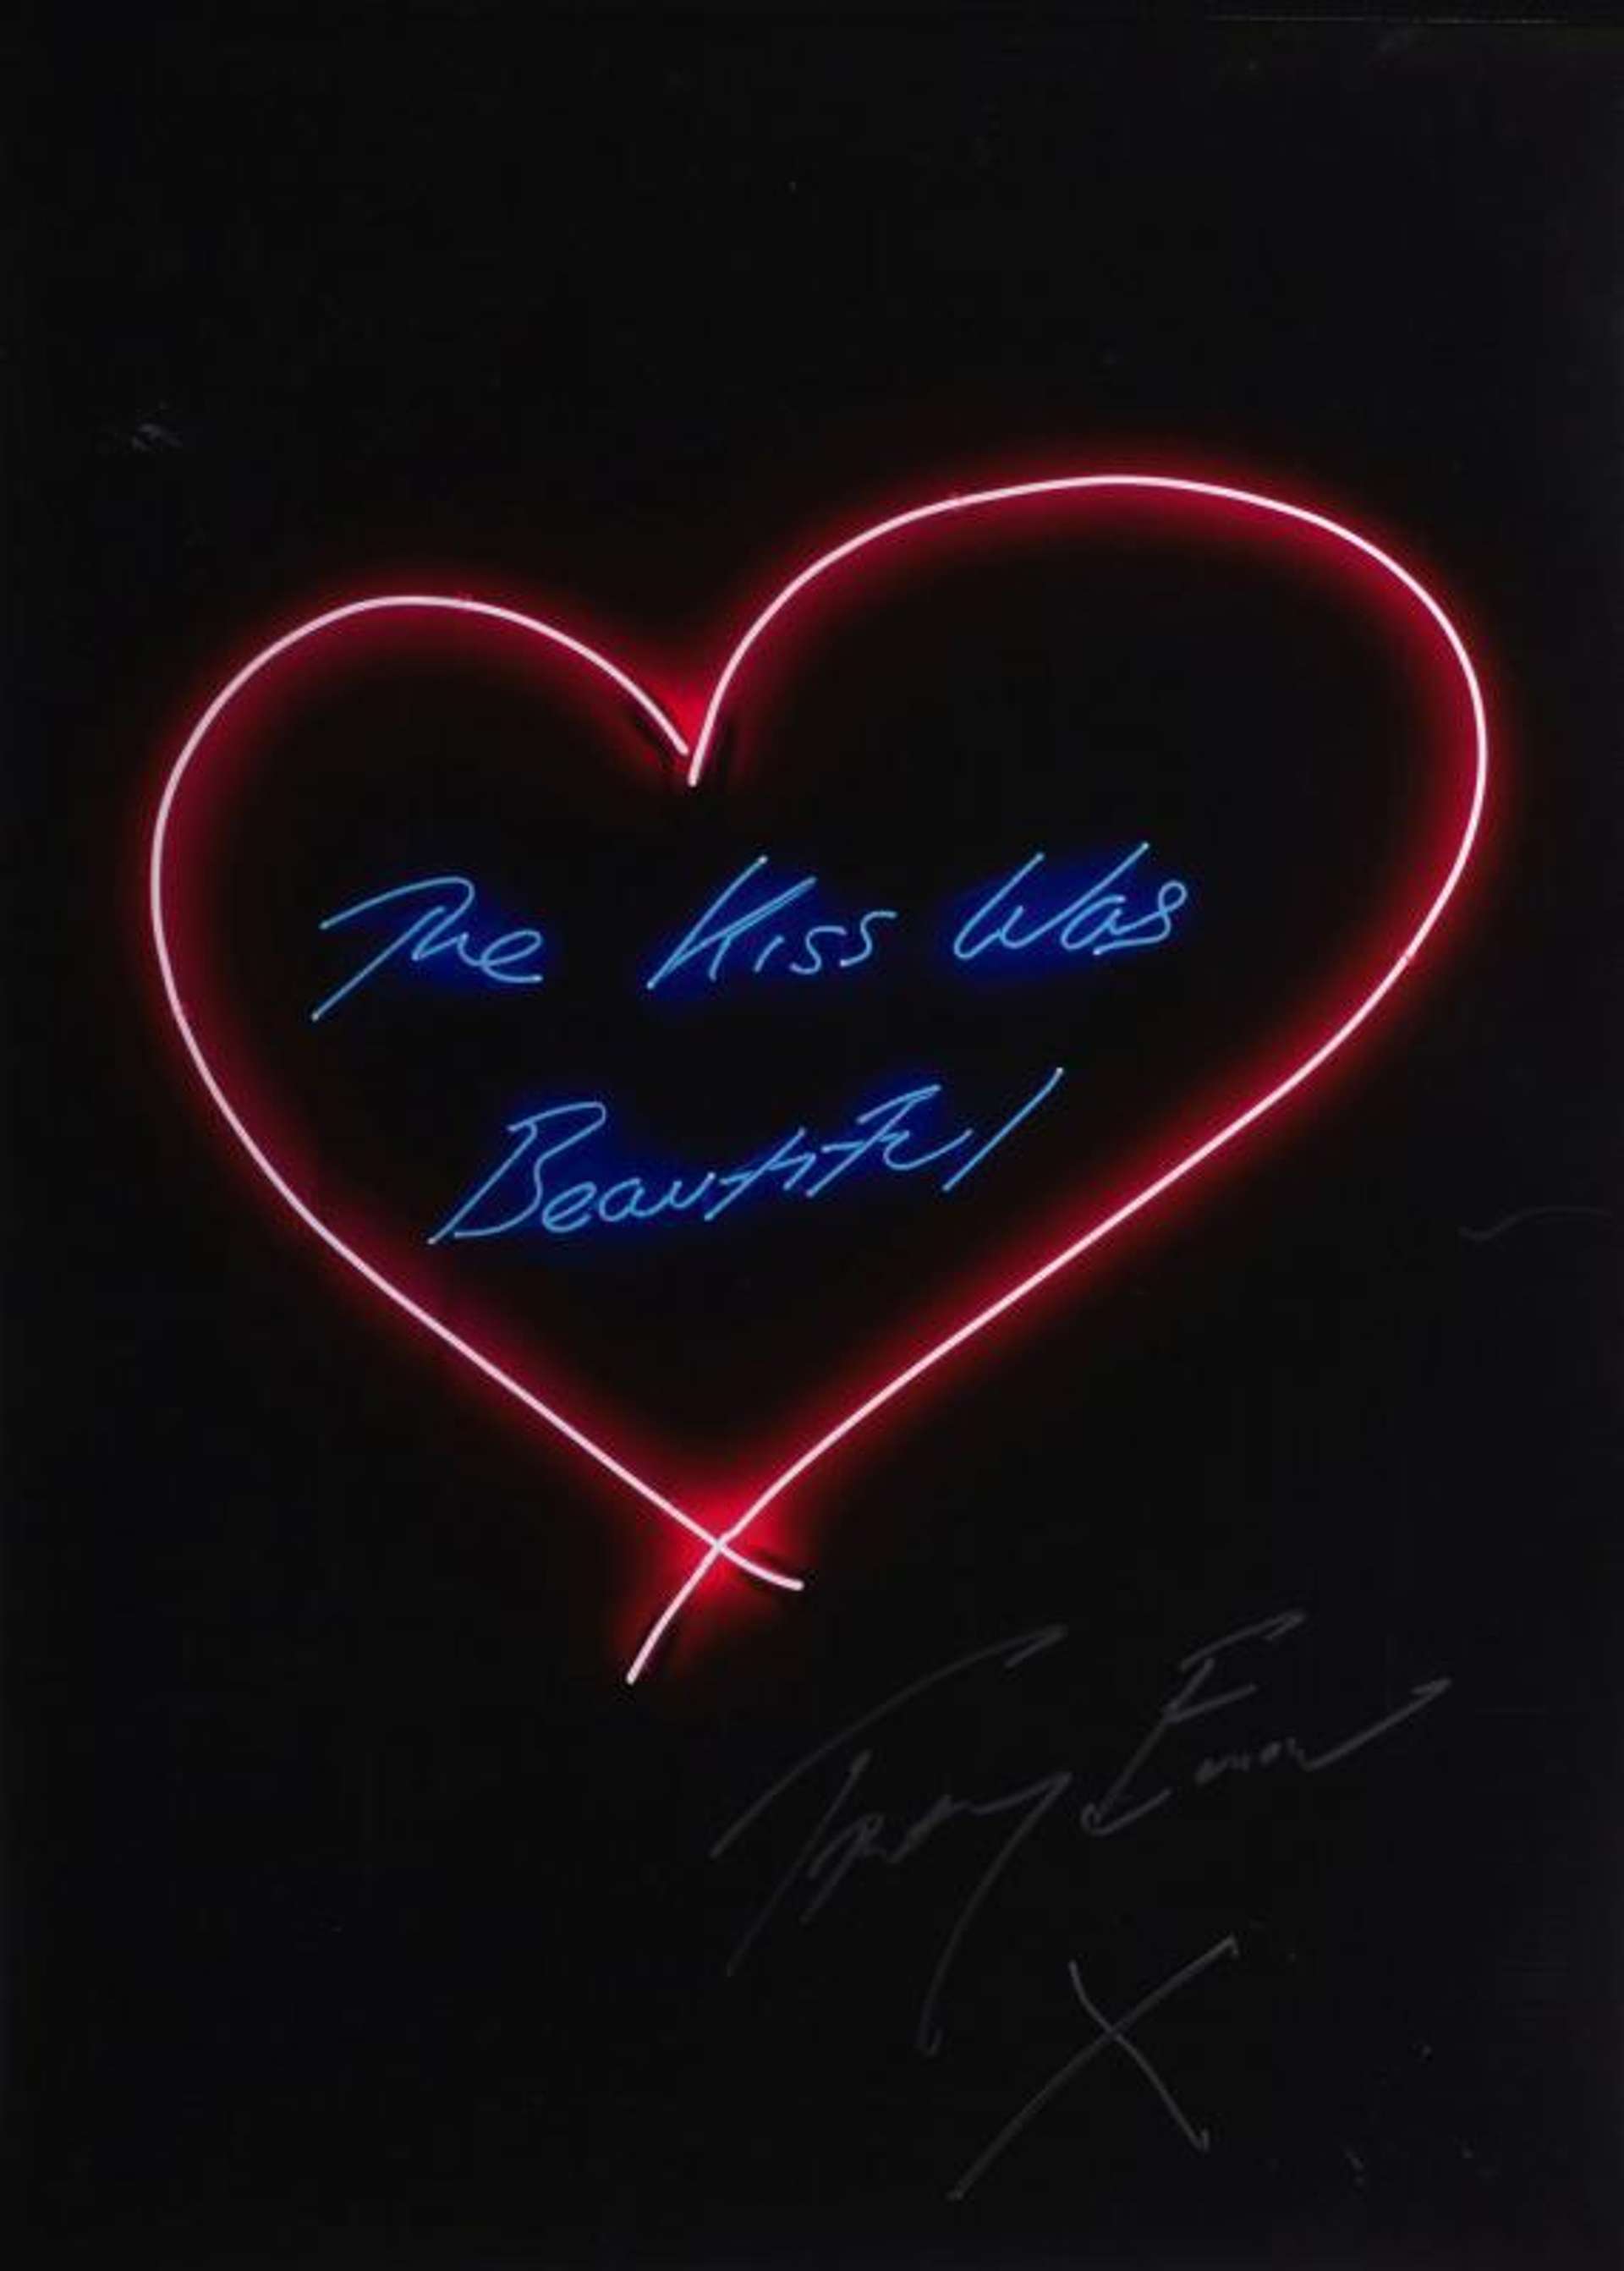 A lithograph depicting one of Emin's neon works, a red love heart frames the words: ‘The kiss was beautiful’.